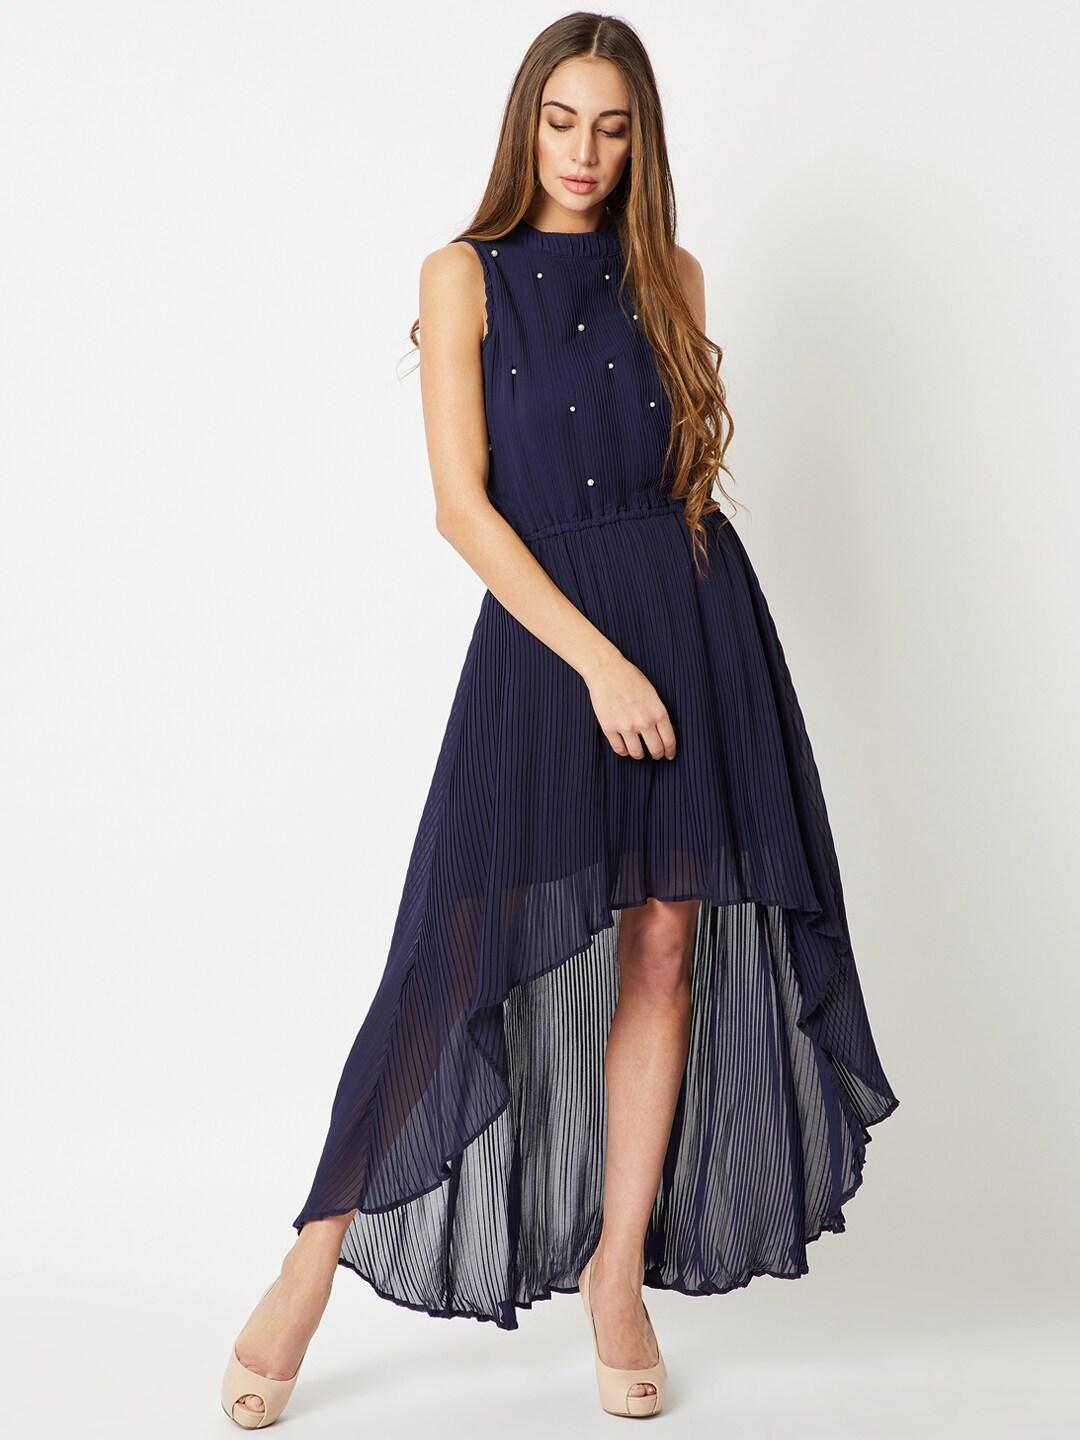 miss-chase-women-navy-blue-embellished-fit-and-flare-dress